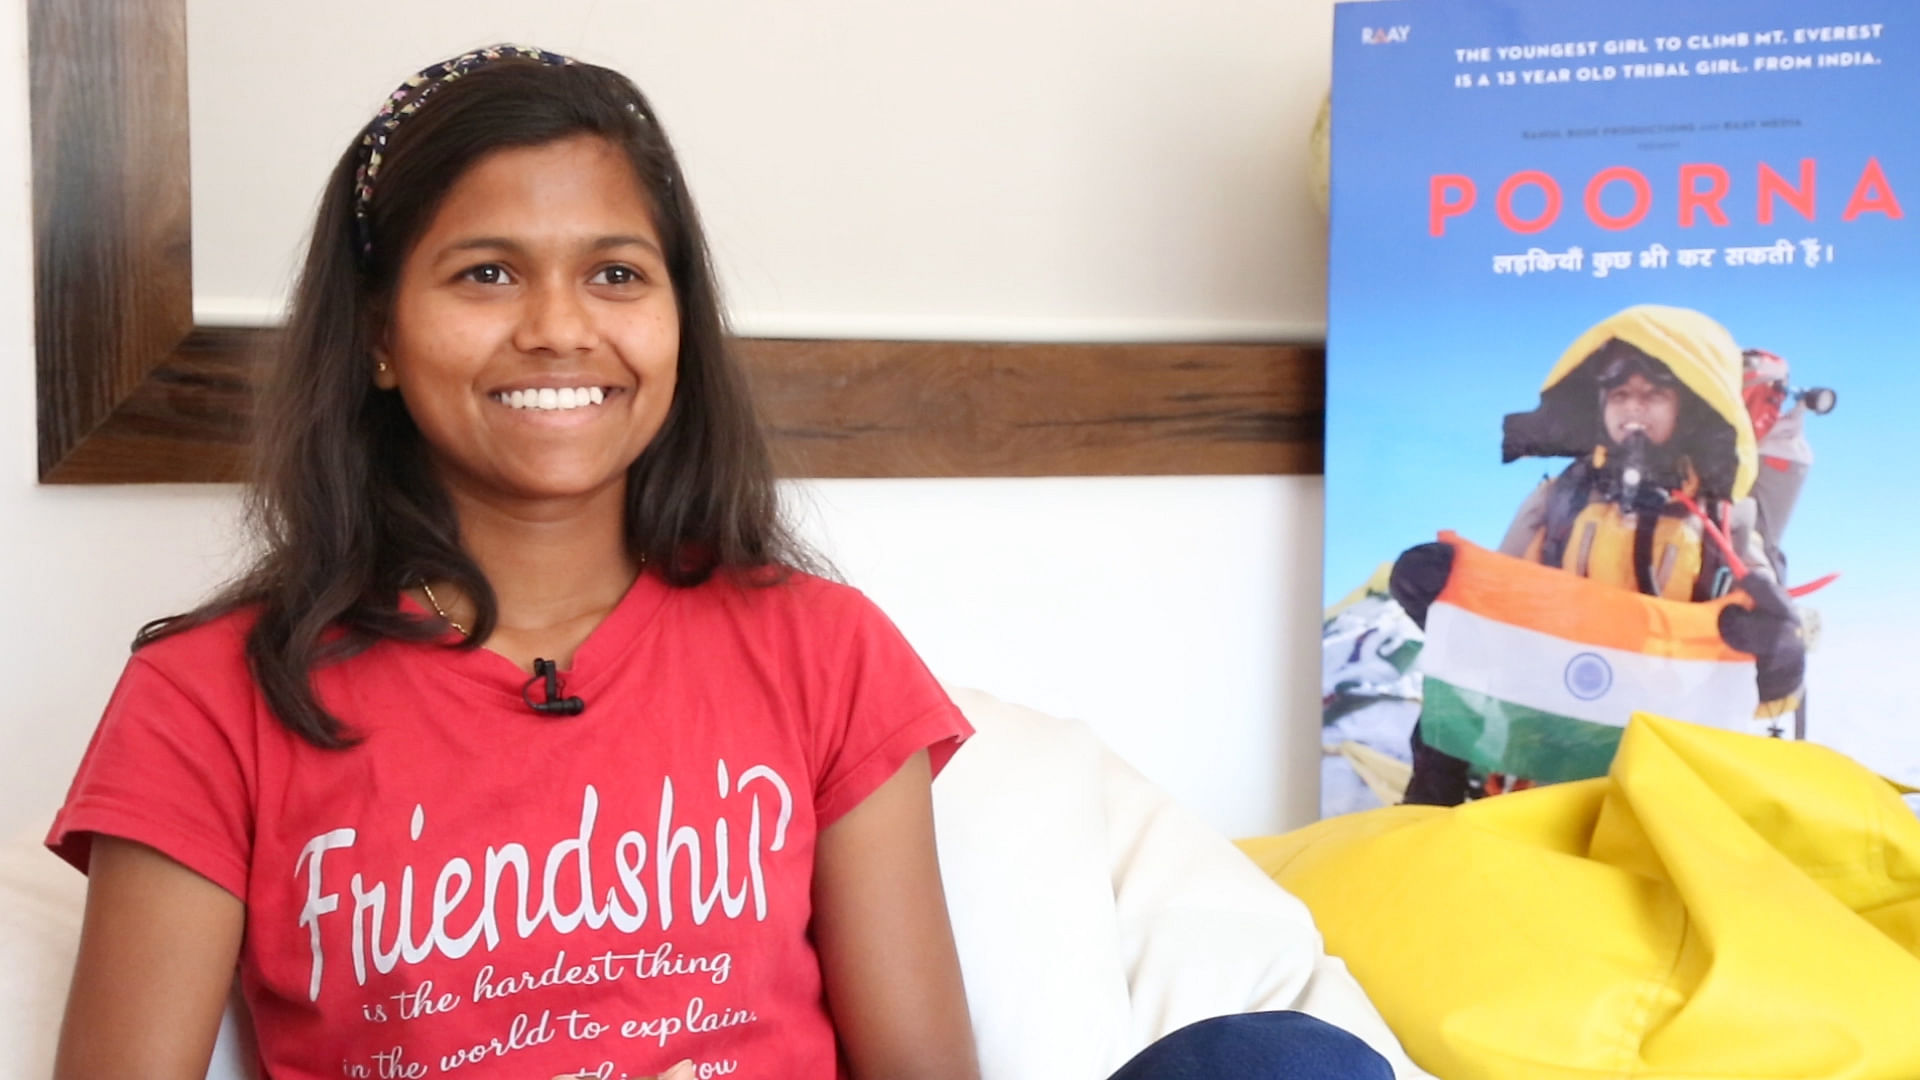 Meet the youngest girl to climb Mount Everest - Poorna Malavath. (Photo: The Quint)